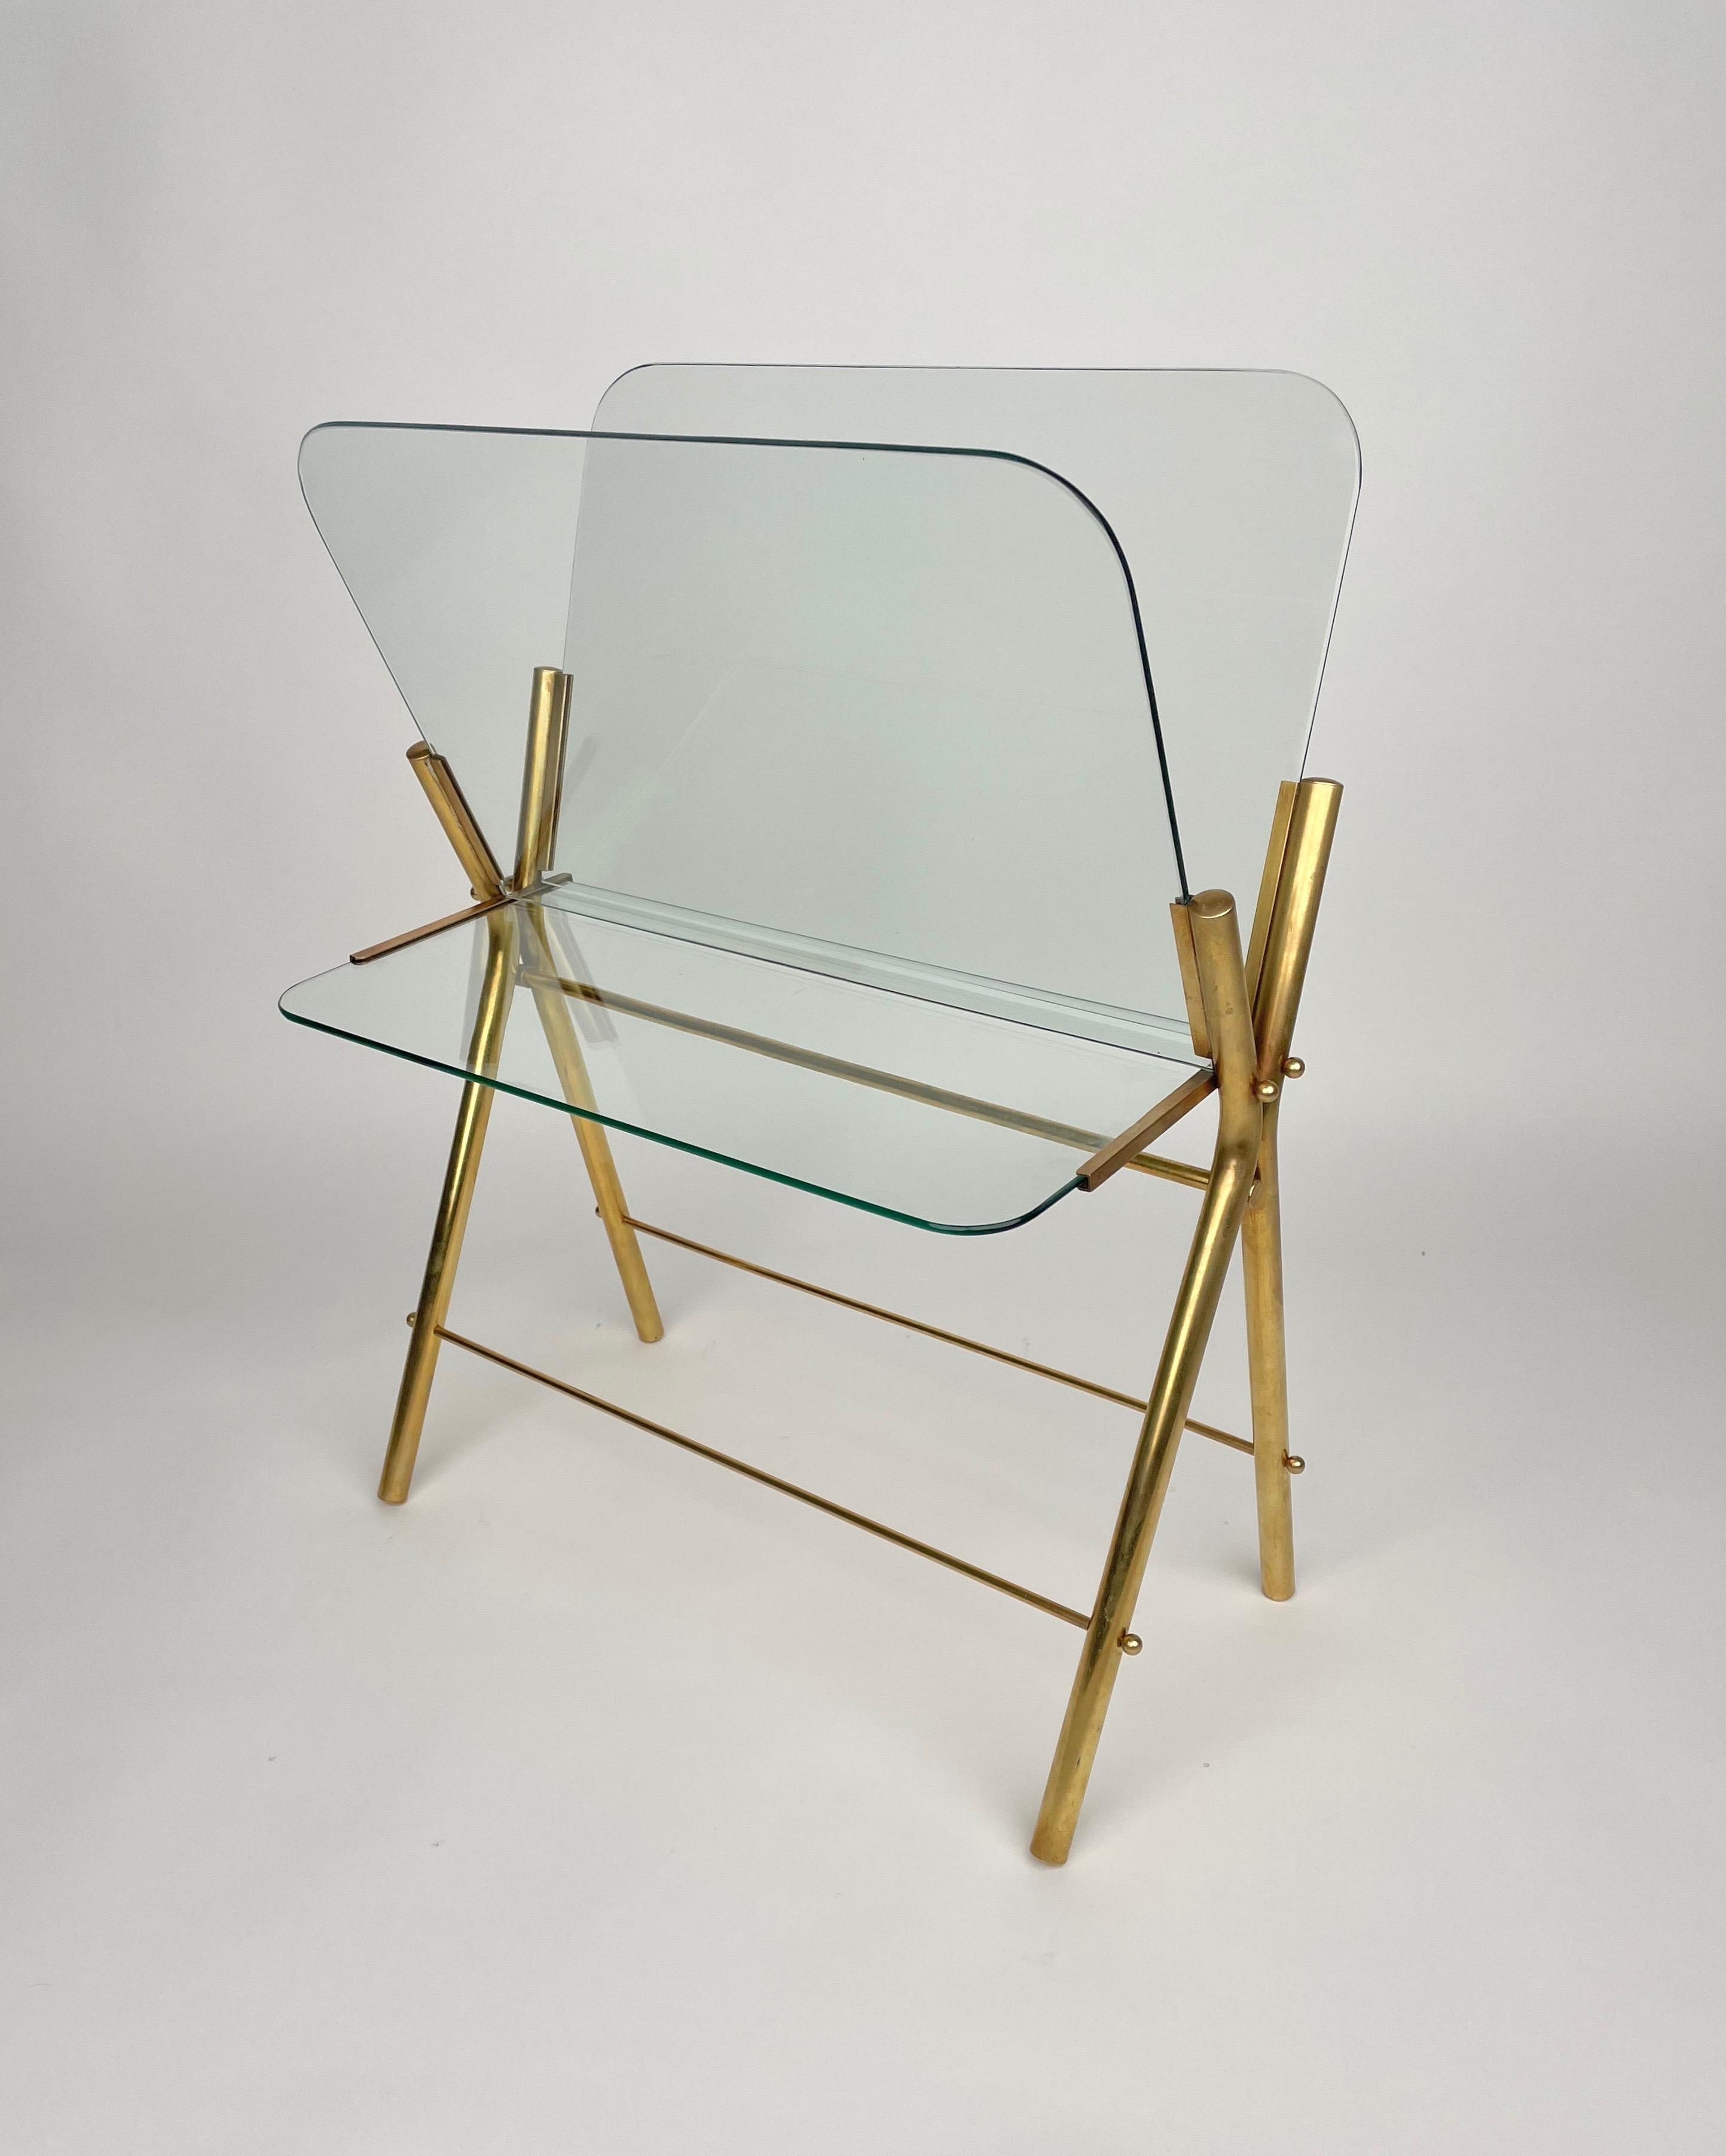 Magazine Rack Table Brass and Glass, Italy 1950s For Sale 5